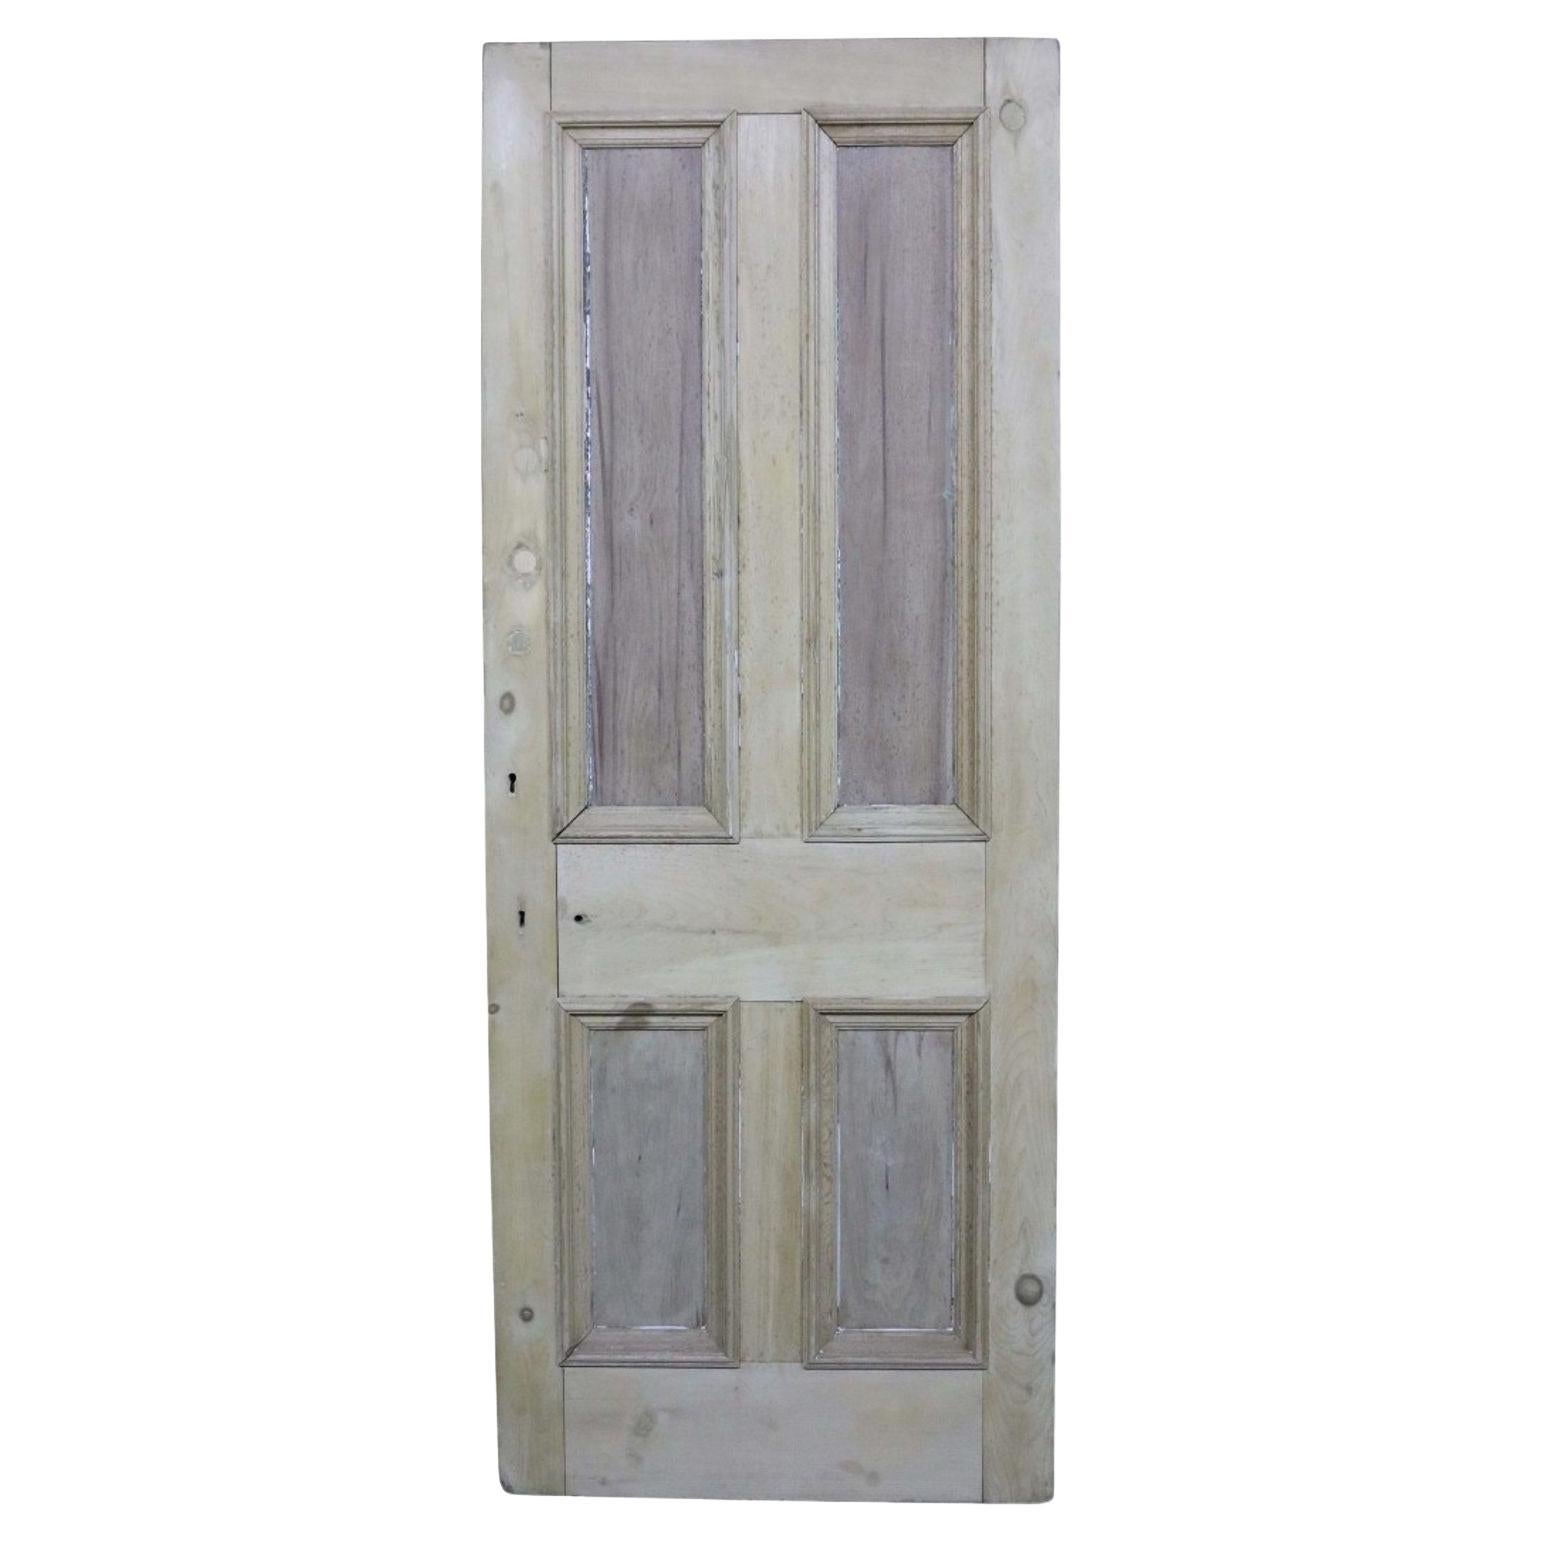 A Reclaimed Pine Four Panel Front Door For Sale